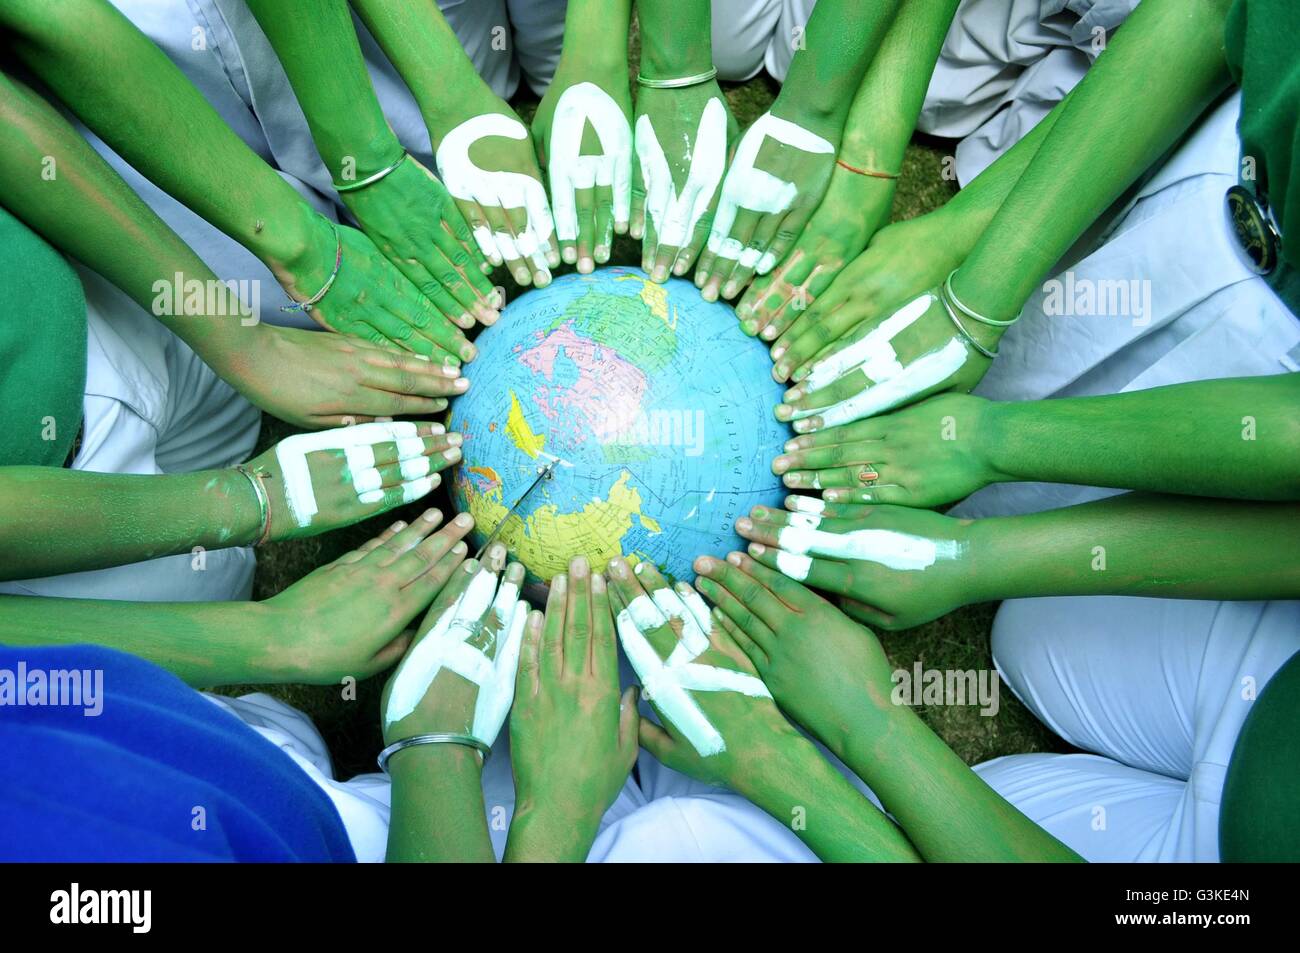 Patiala, India. 20th Apr, 2016. School students gives a message for “Save Earth” during the awareness program on the eve of World Earth Day in the village of Reethkheri 15km from Patiala, Sirhind road. © Rajesh Sachar/Pacific Press/Alamy Live News Stock Photo